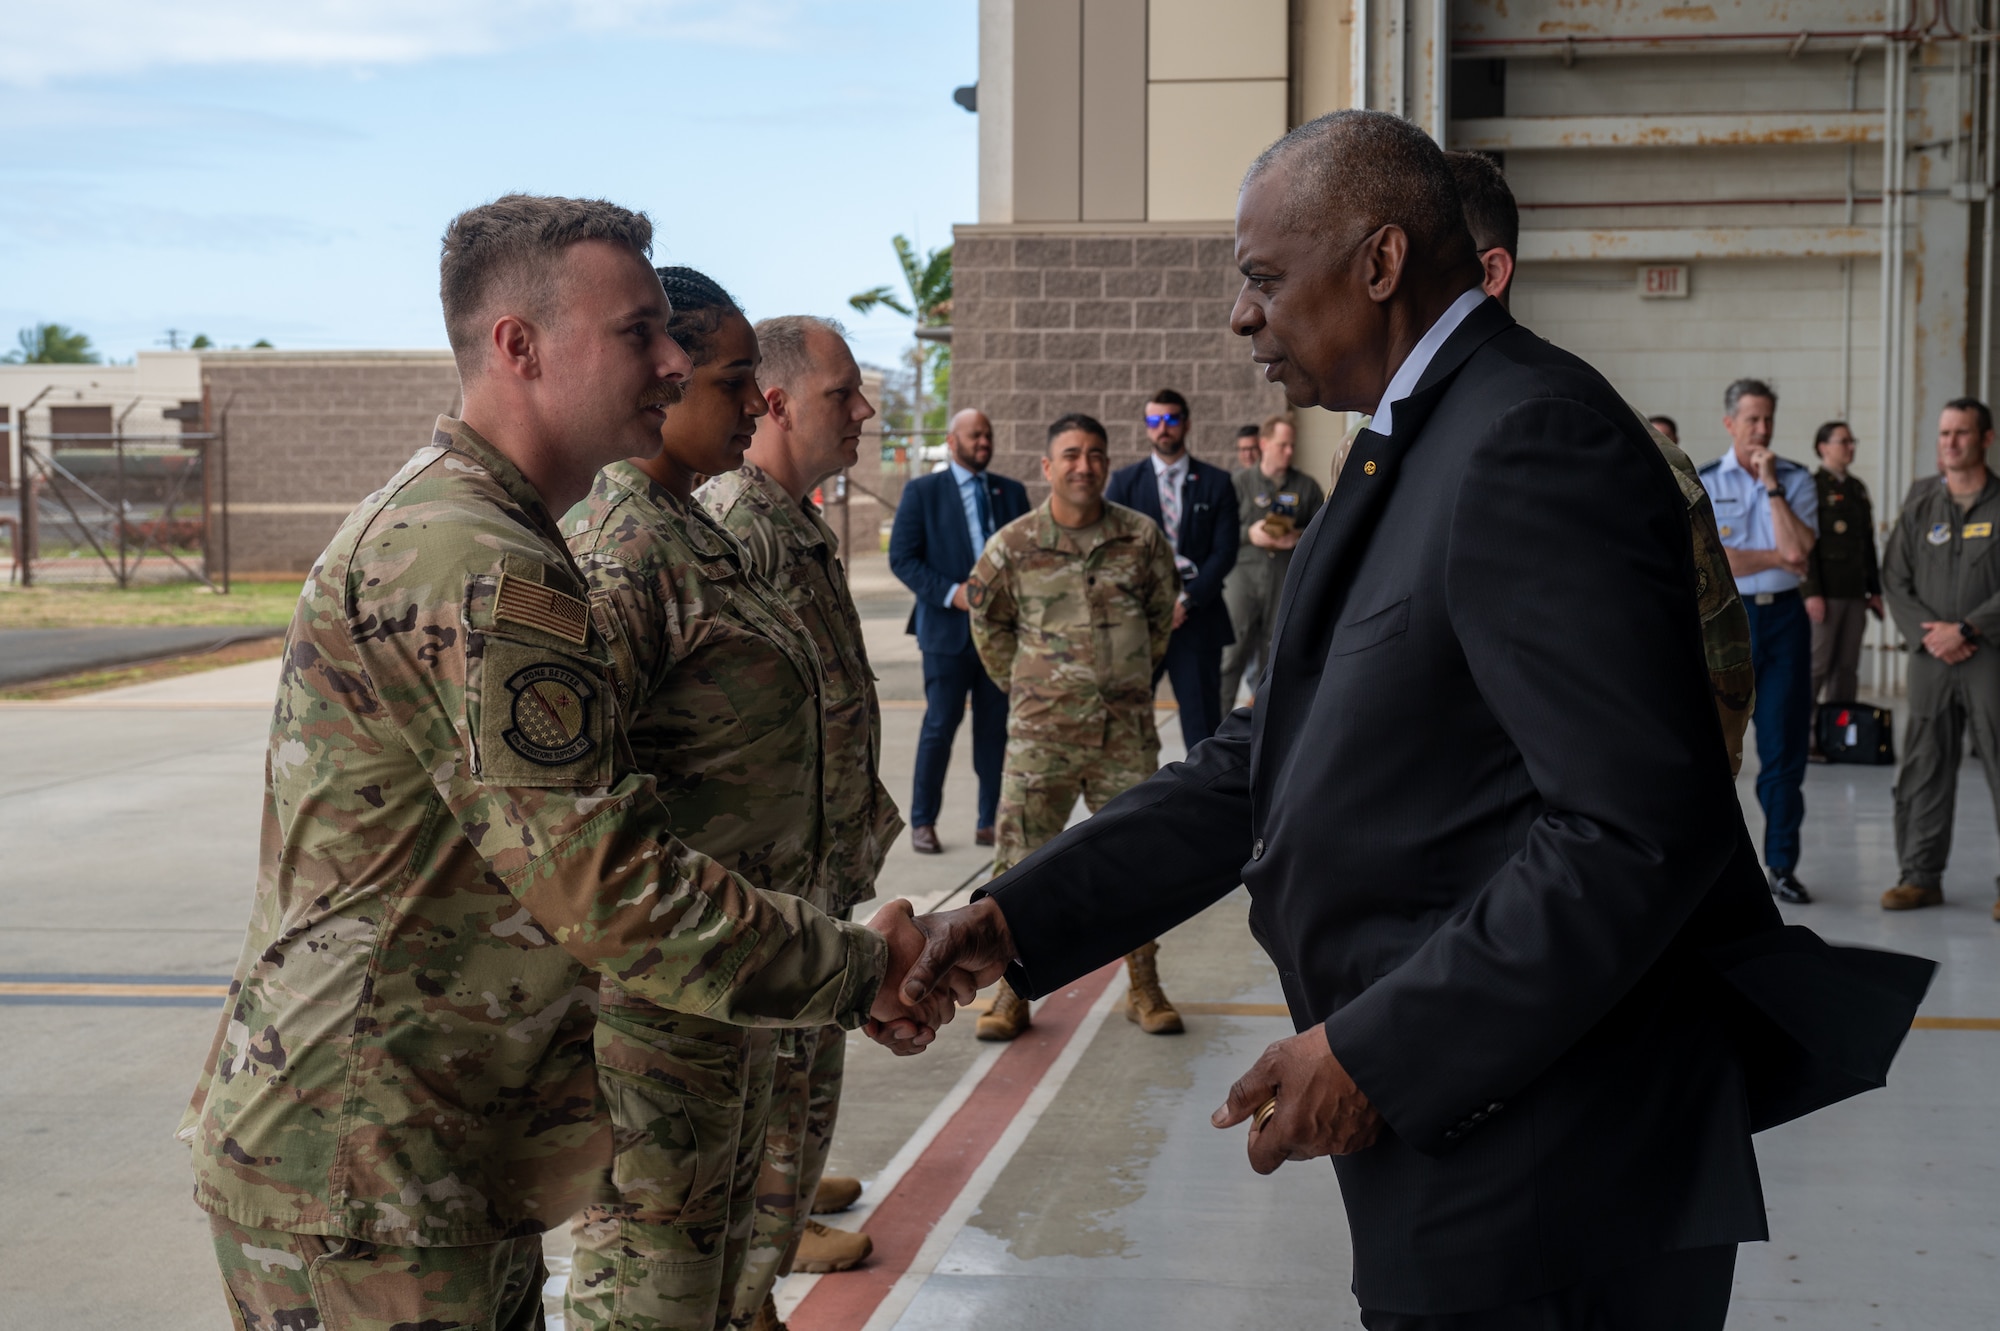 Secretary of Defense shakes an Airman's hand while giving thema coin.